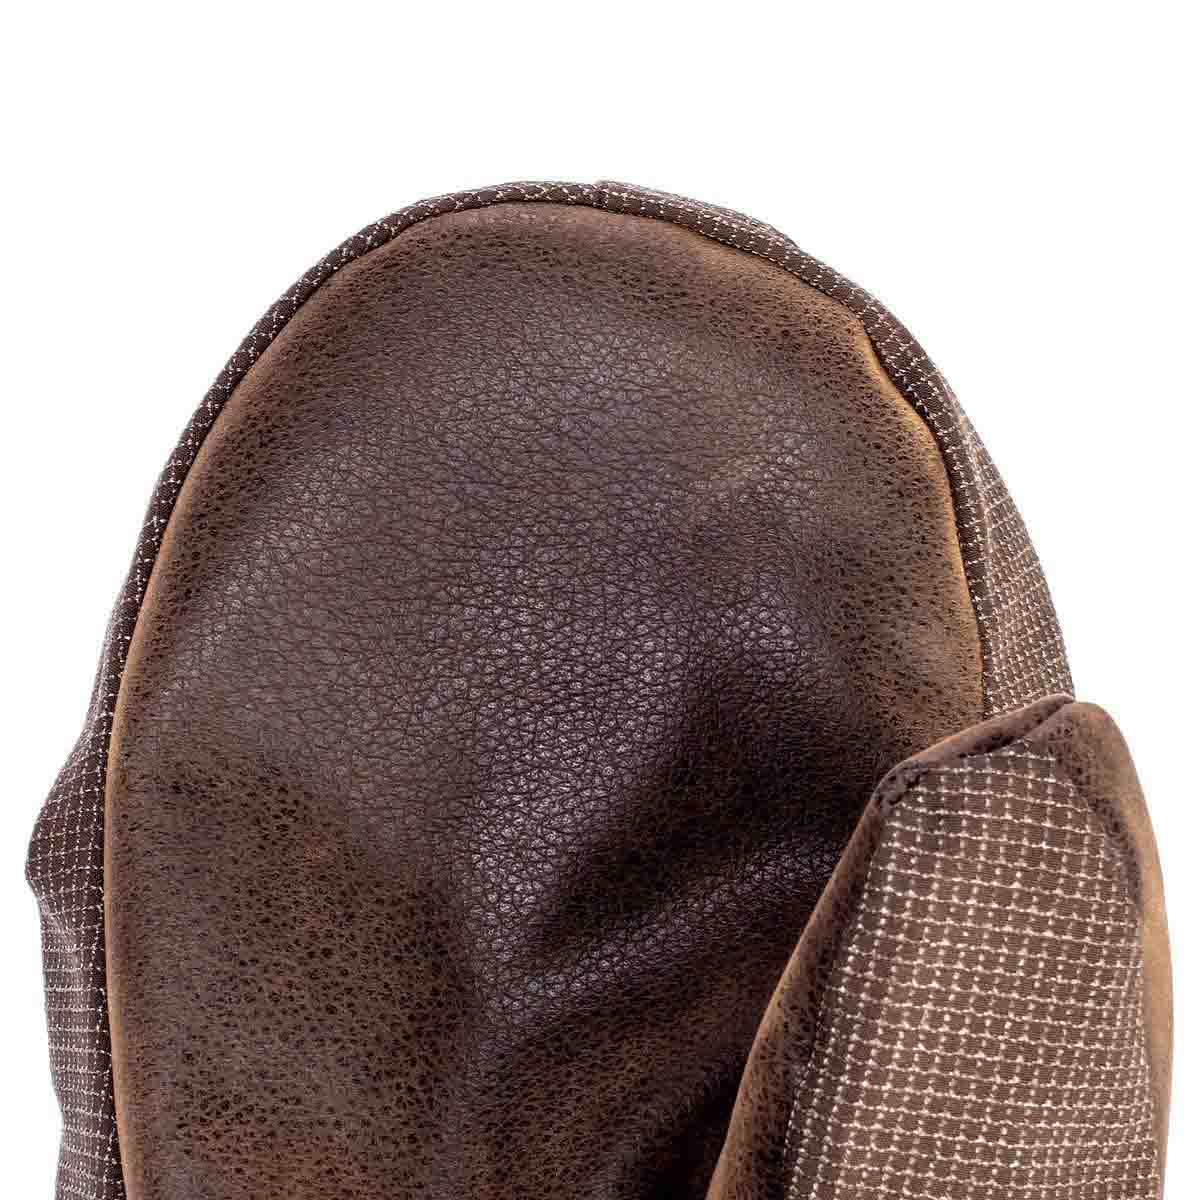 Kevlar Waterproof Tough Winter Sports Mittens for Men feature synthetic leather grip on the palm